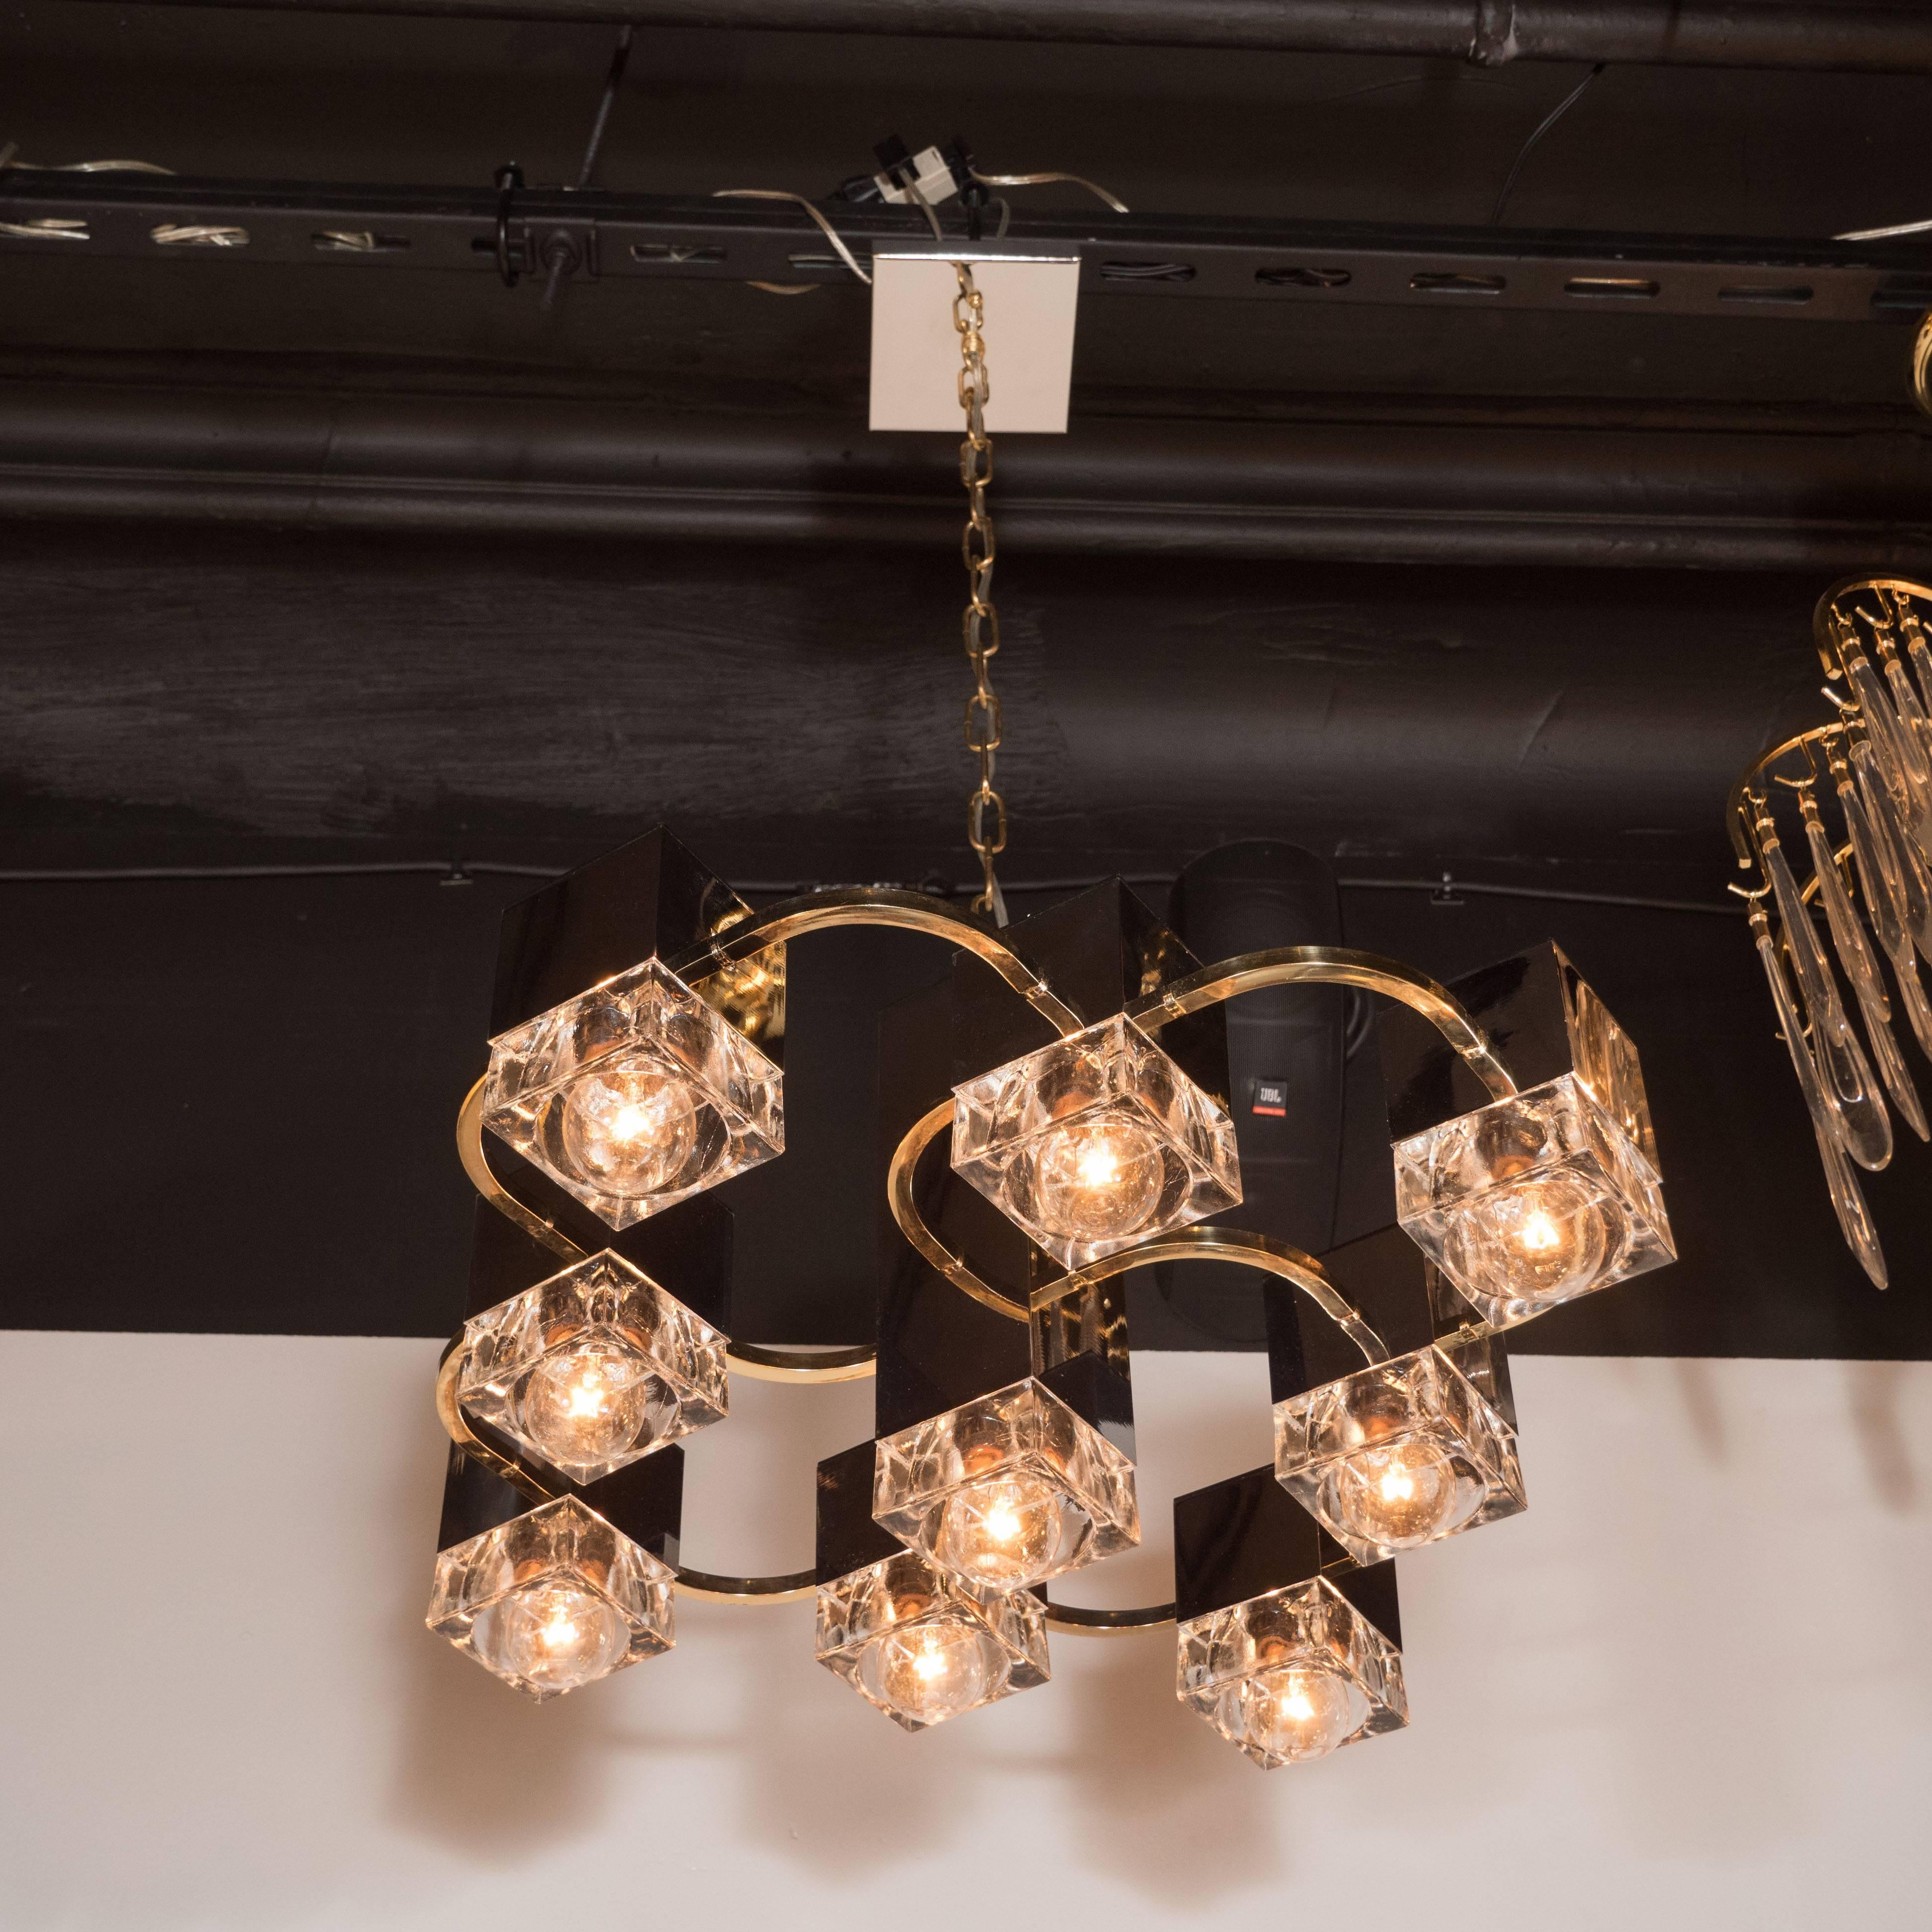 This sophisticated Scolari chandelier features a central rectangular pillar in chrome with eight chrome cube forms, holding waterglass fittings that attach to curved brass arms. This fixture embodies sophisticated Mid-Century Modern design at its